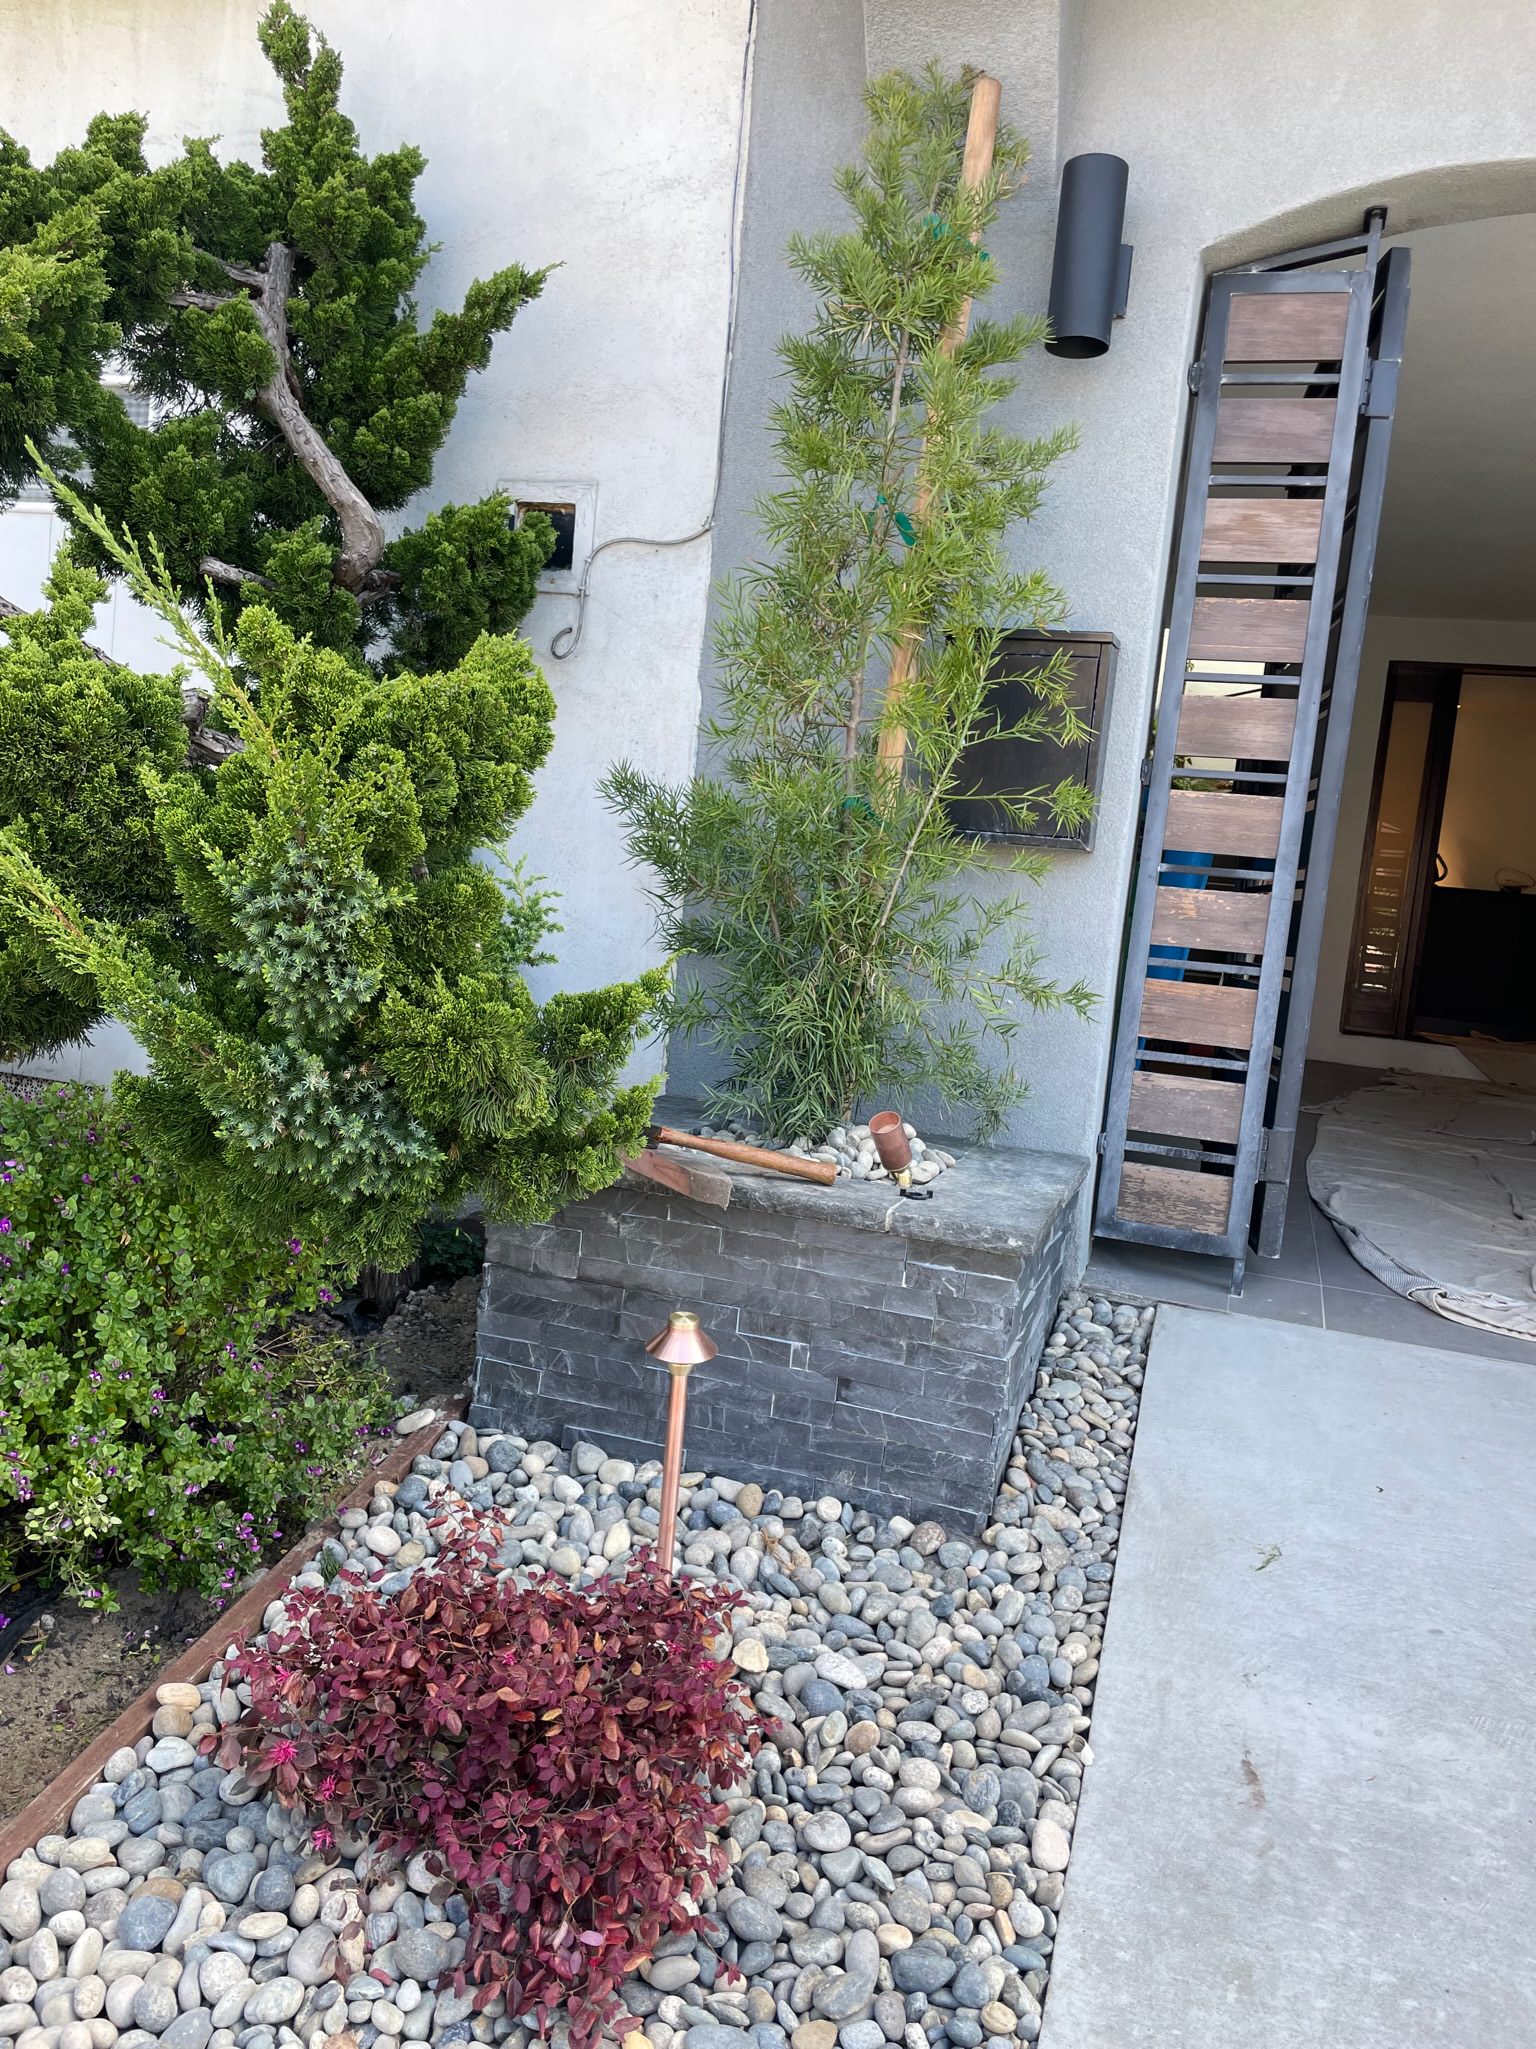 Front yard raised planter with Fern Pine (Podocarpus Gracillor) planted. Planter is faced with black stone veneer and capped with black basalt.